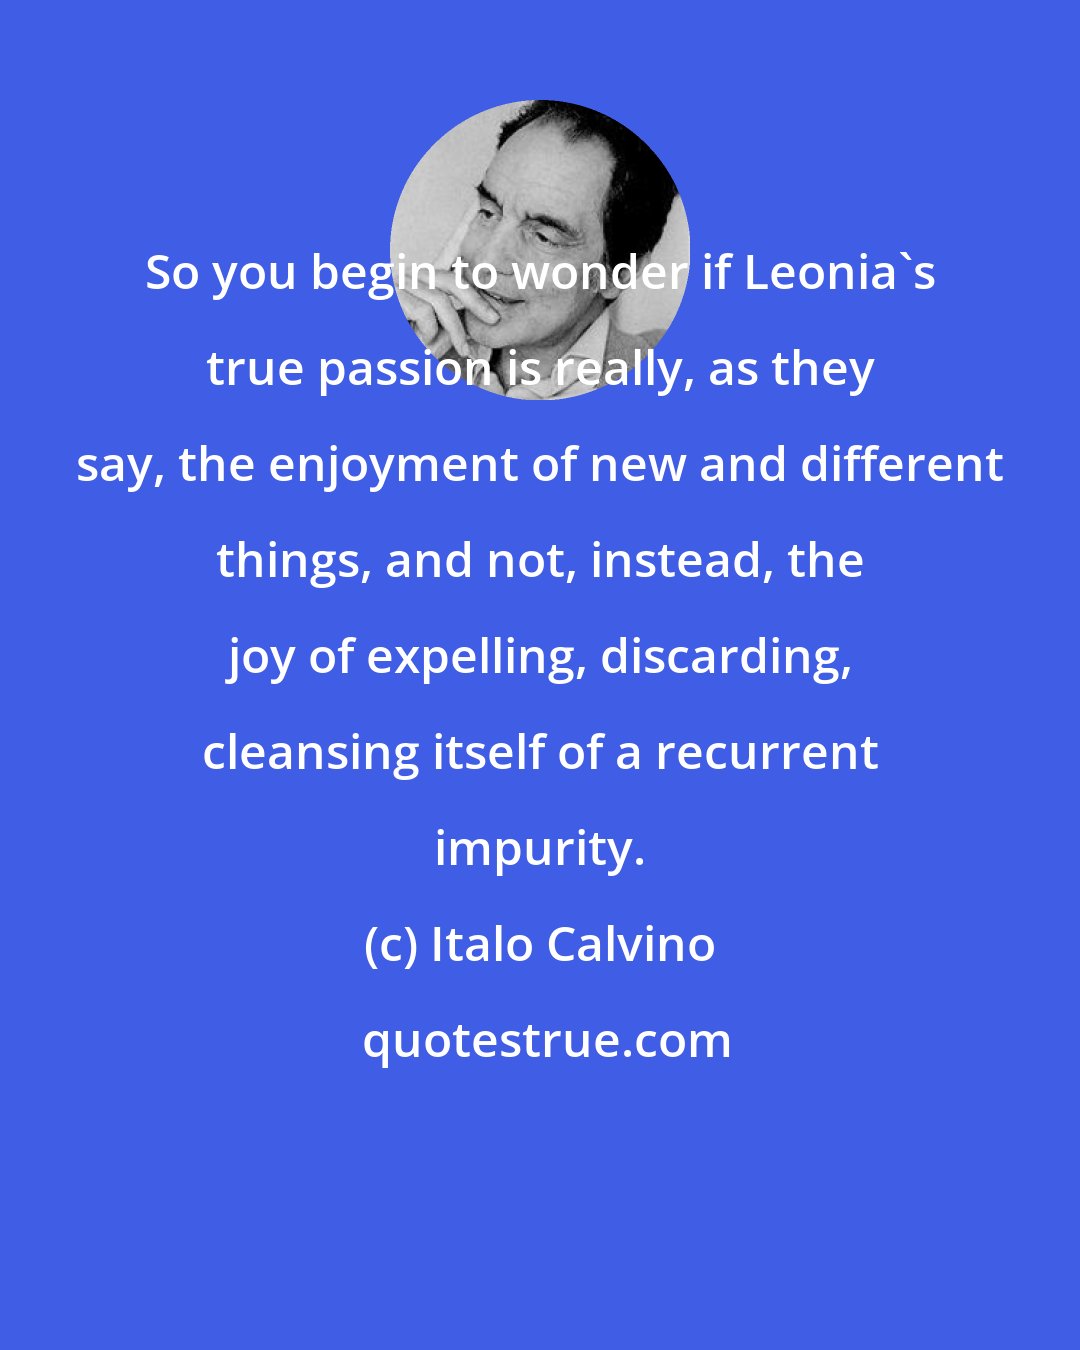 Italo Calvino: So you begin to wonder if Leonia's true passion is really, as they say, the enjoyment of new and different things, and not, instead, the joy of expelling, discarding, cleansing itself of a recurrent impurity.